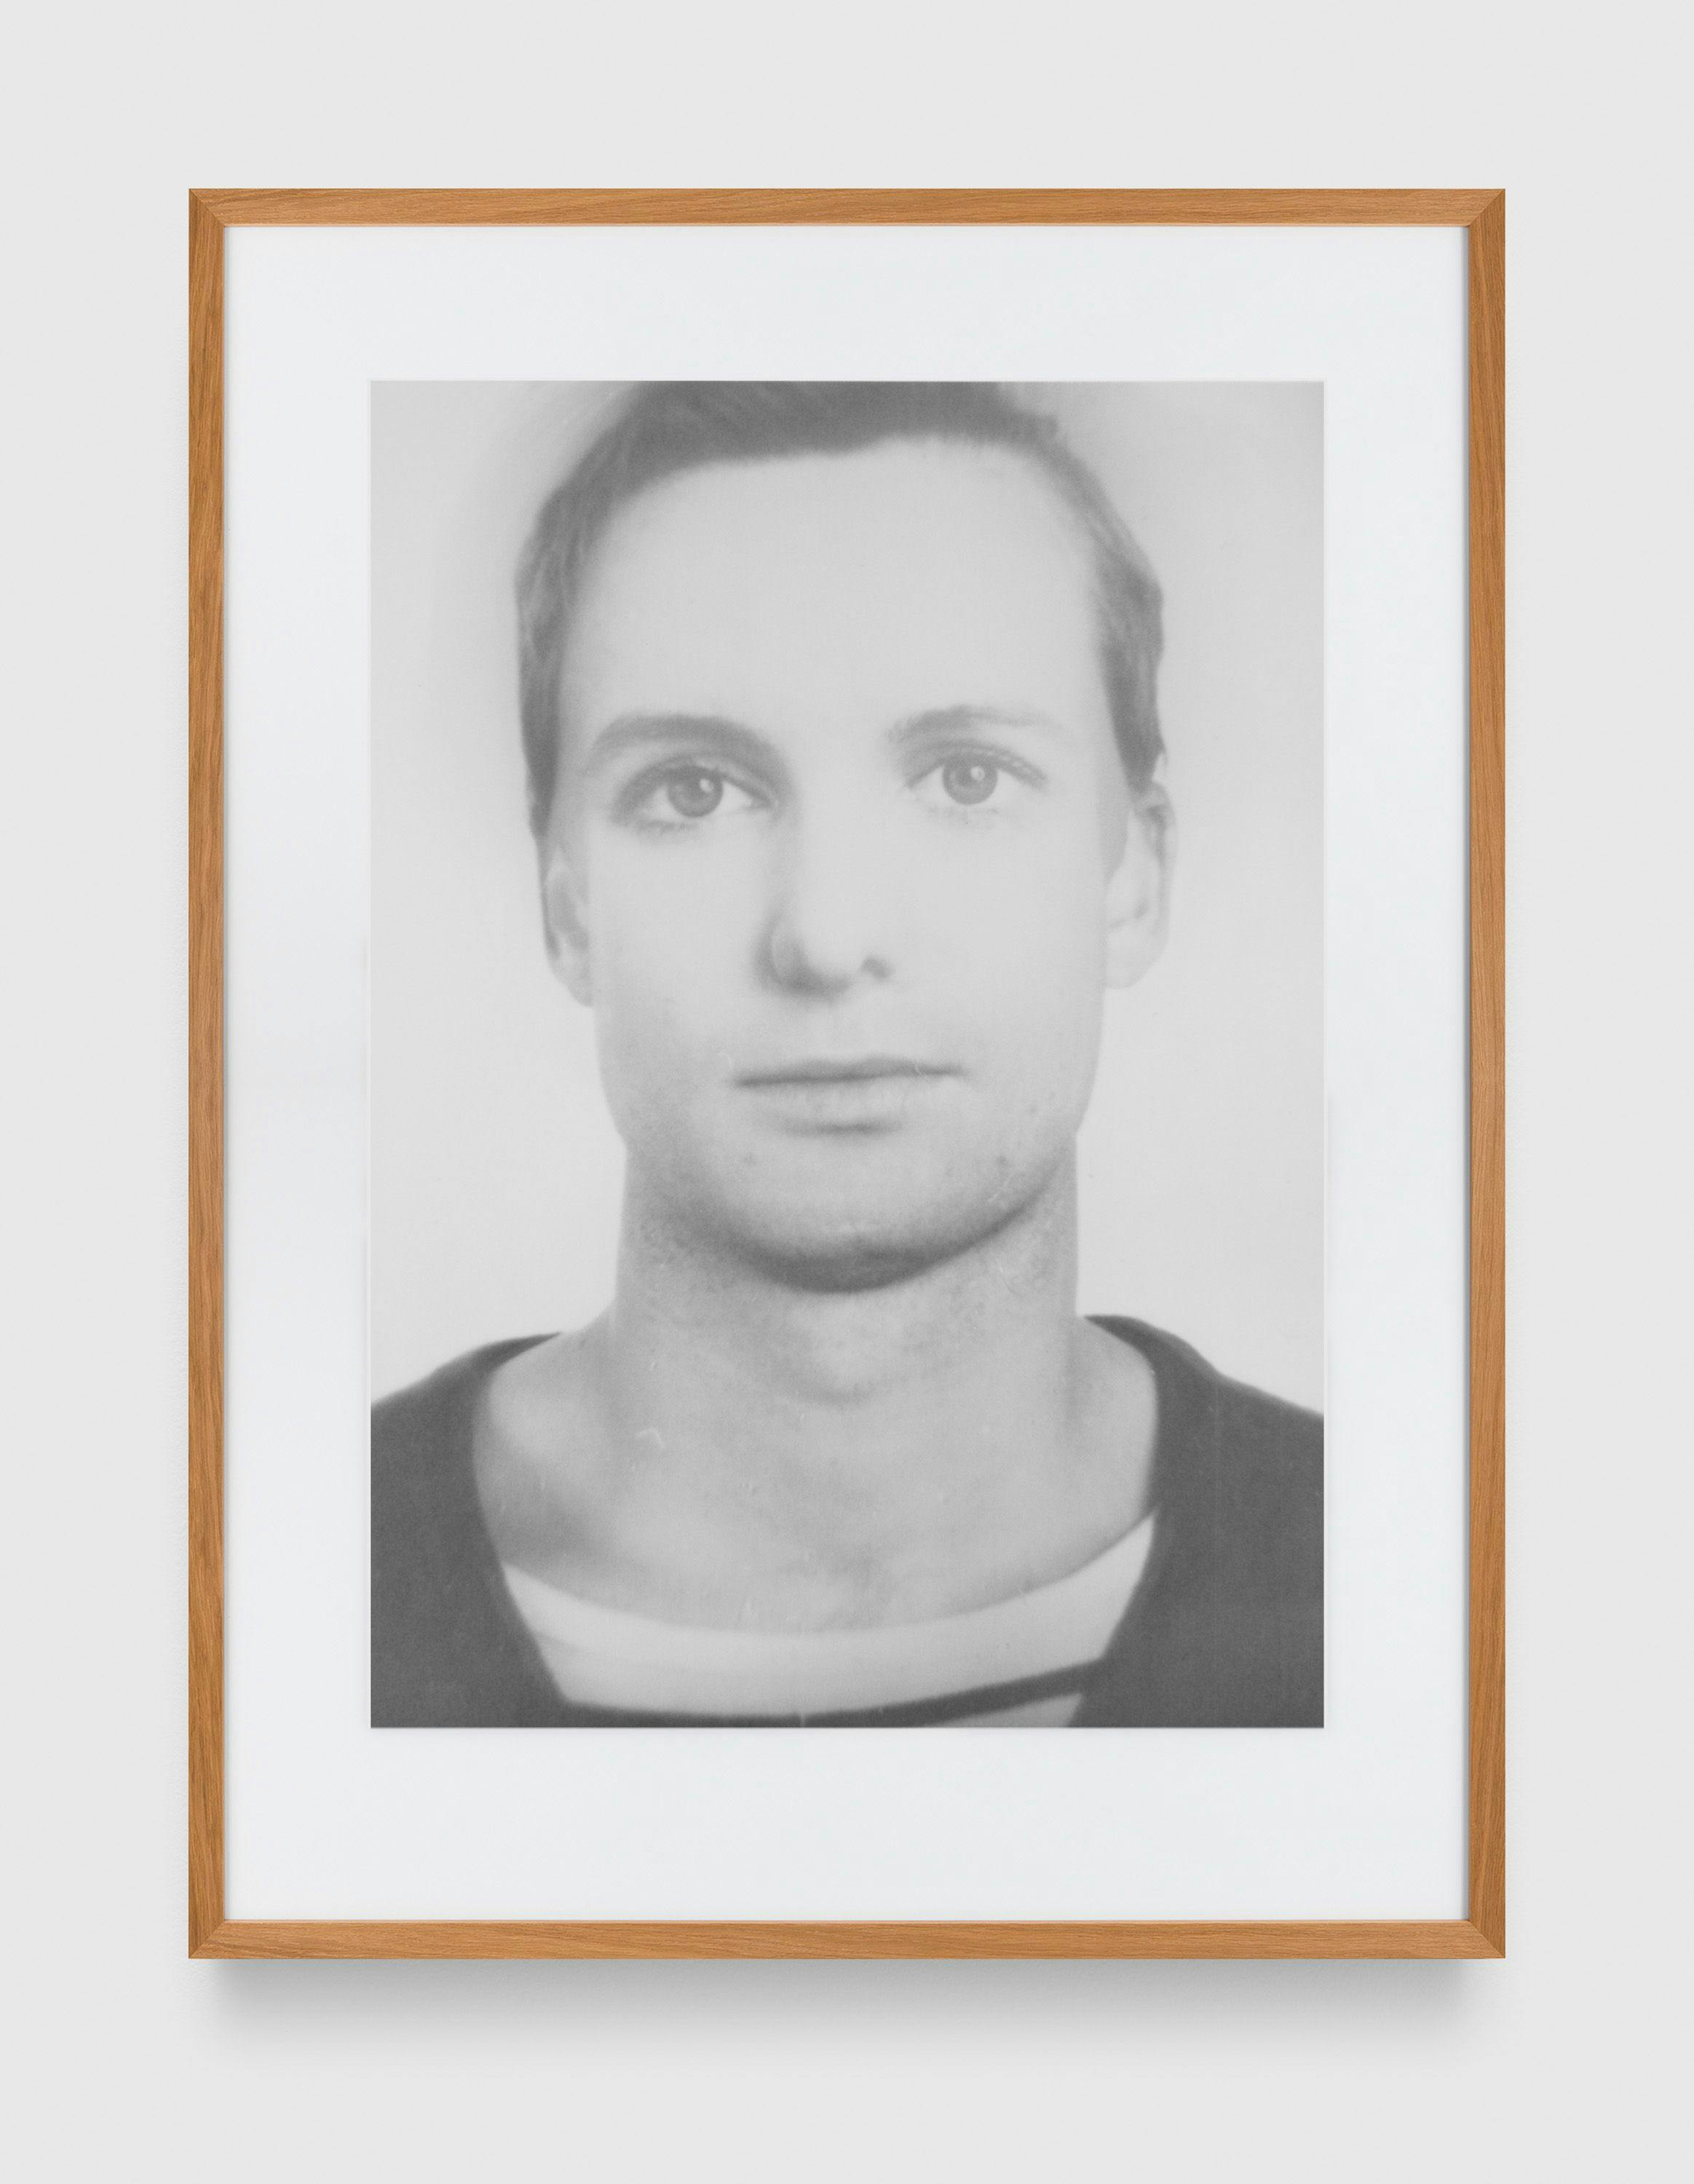 A print by Thomas Ruff, titled anderes Porträt Nr. 143/131, dated in 1994 and 1995.